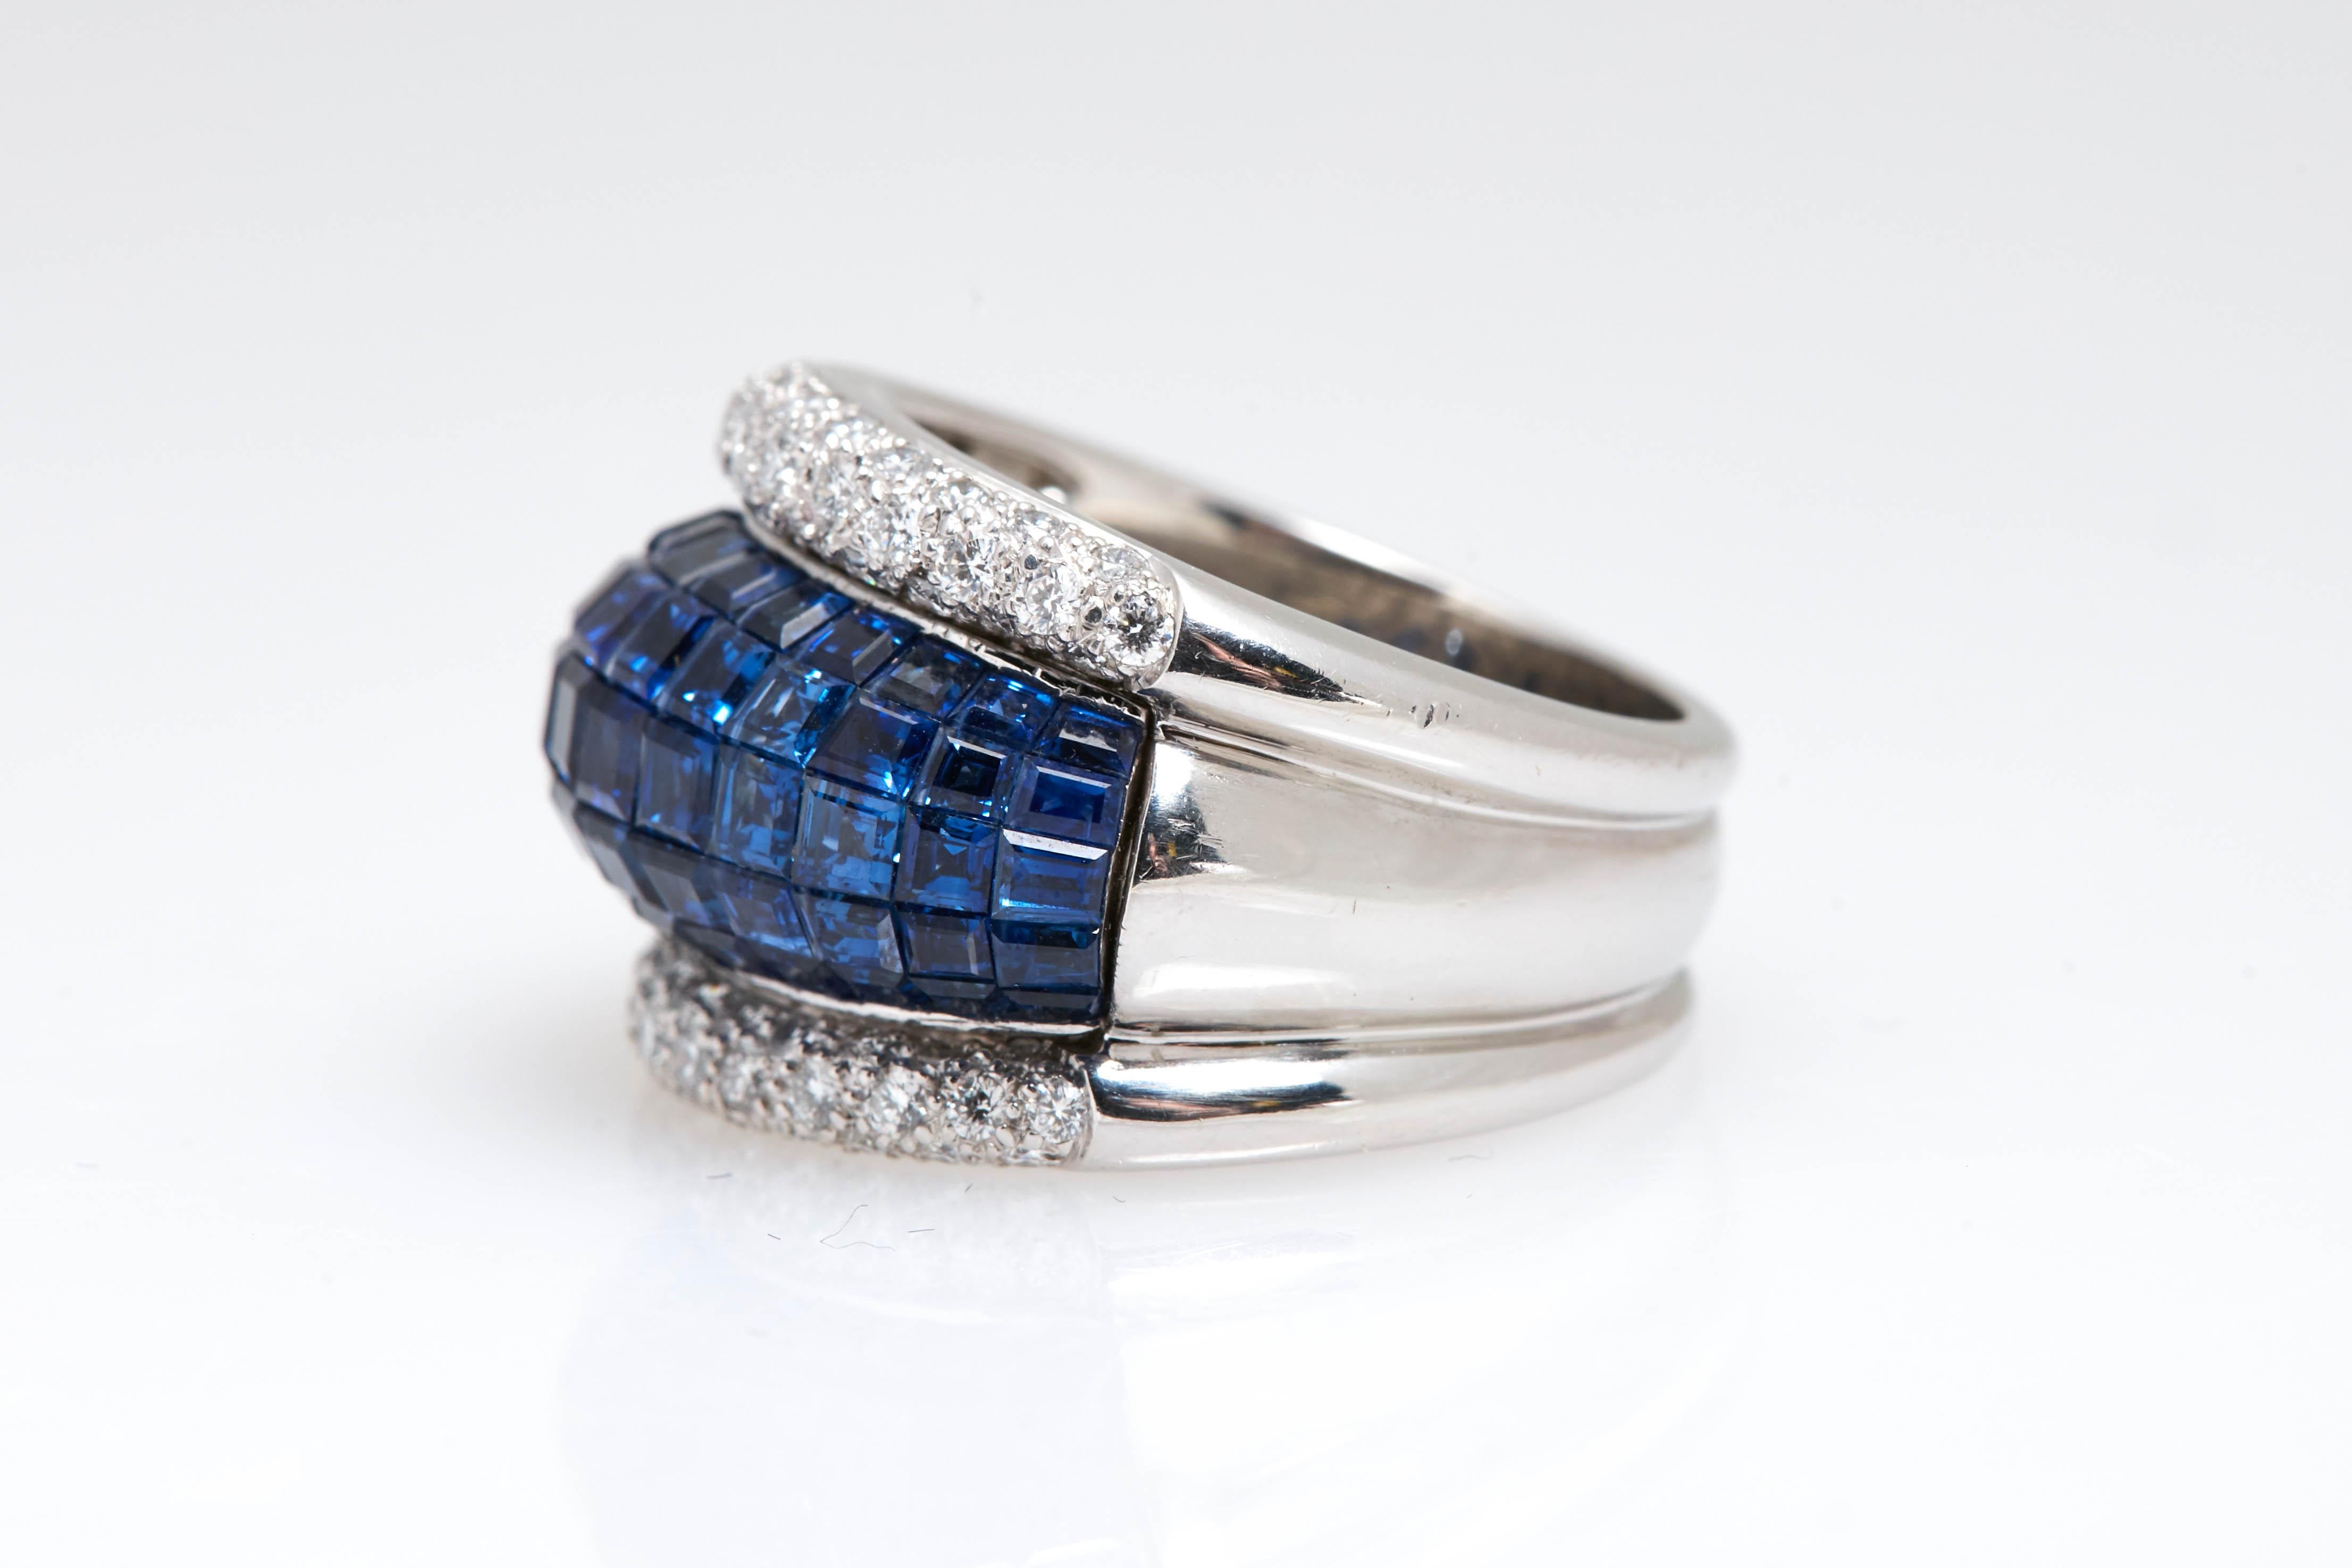 An impeccable ring in platinum with invisible set blue sapphires and diamonds. Circa 1970s.